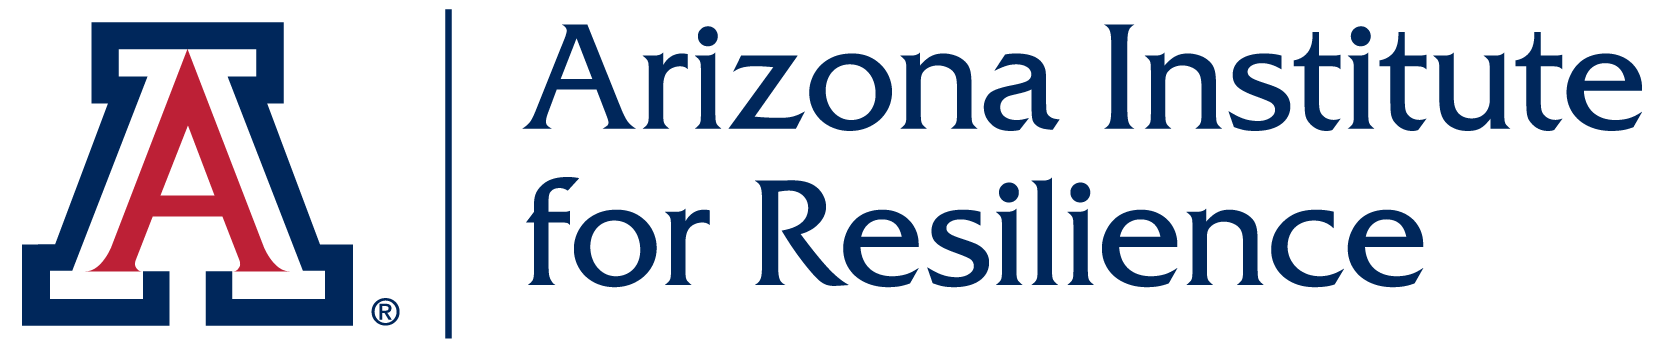 Arizona Institute for Resilience